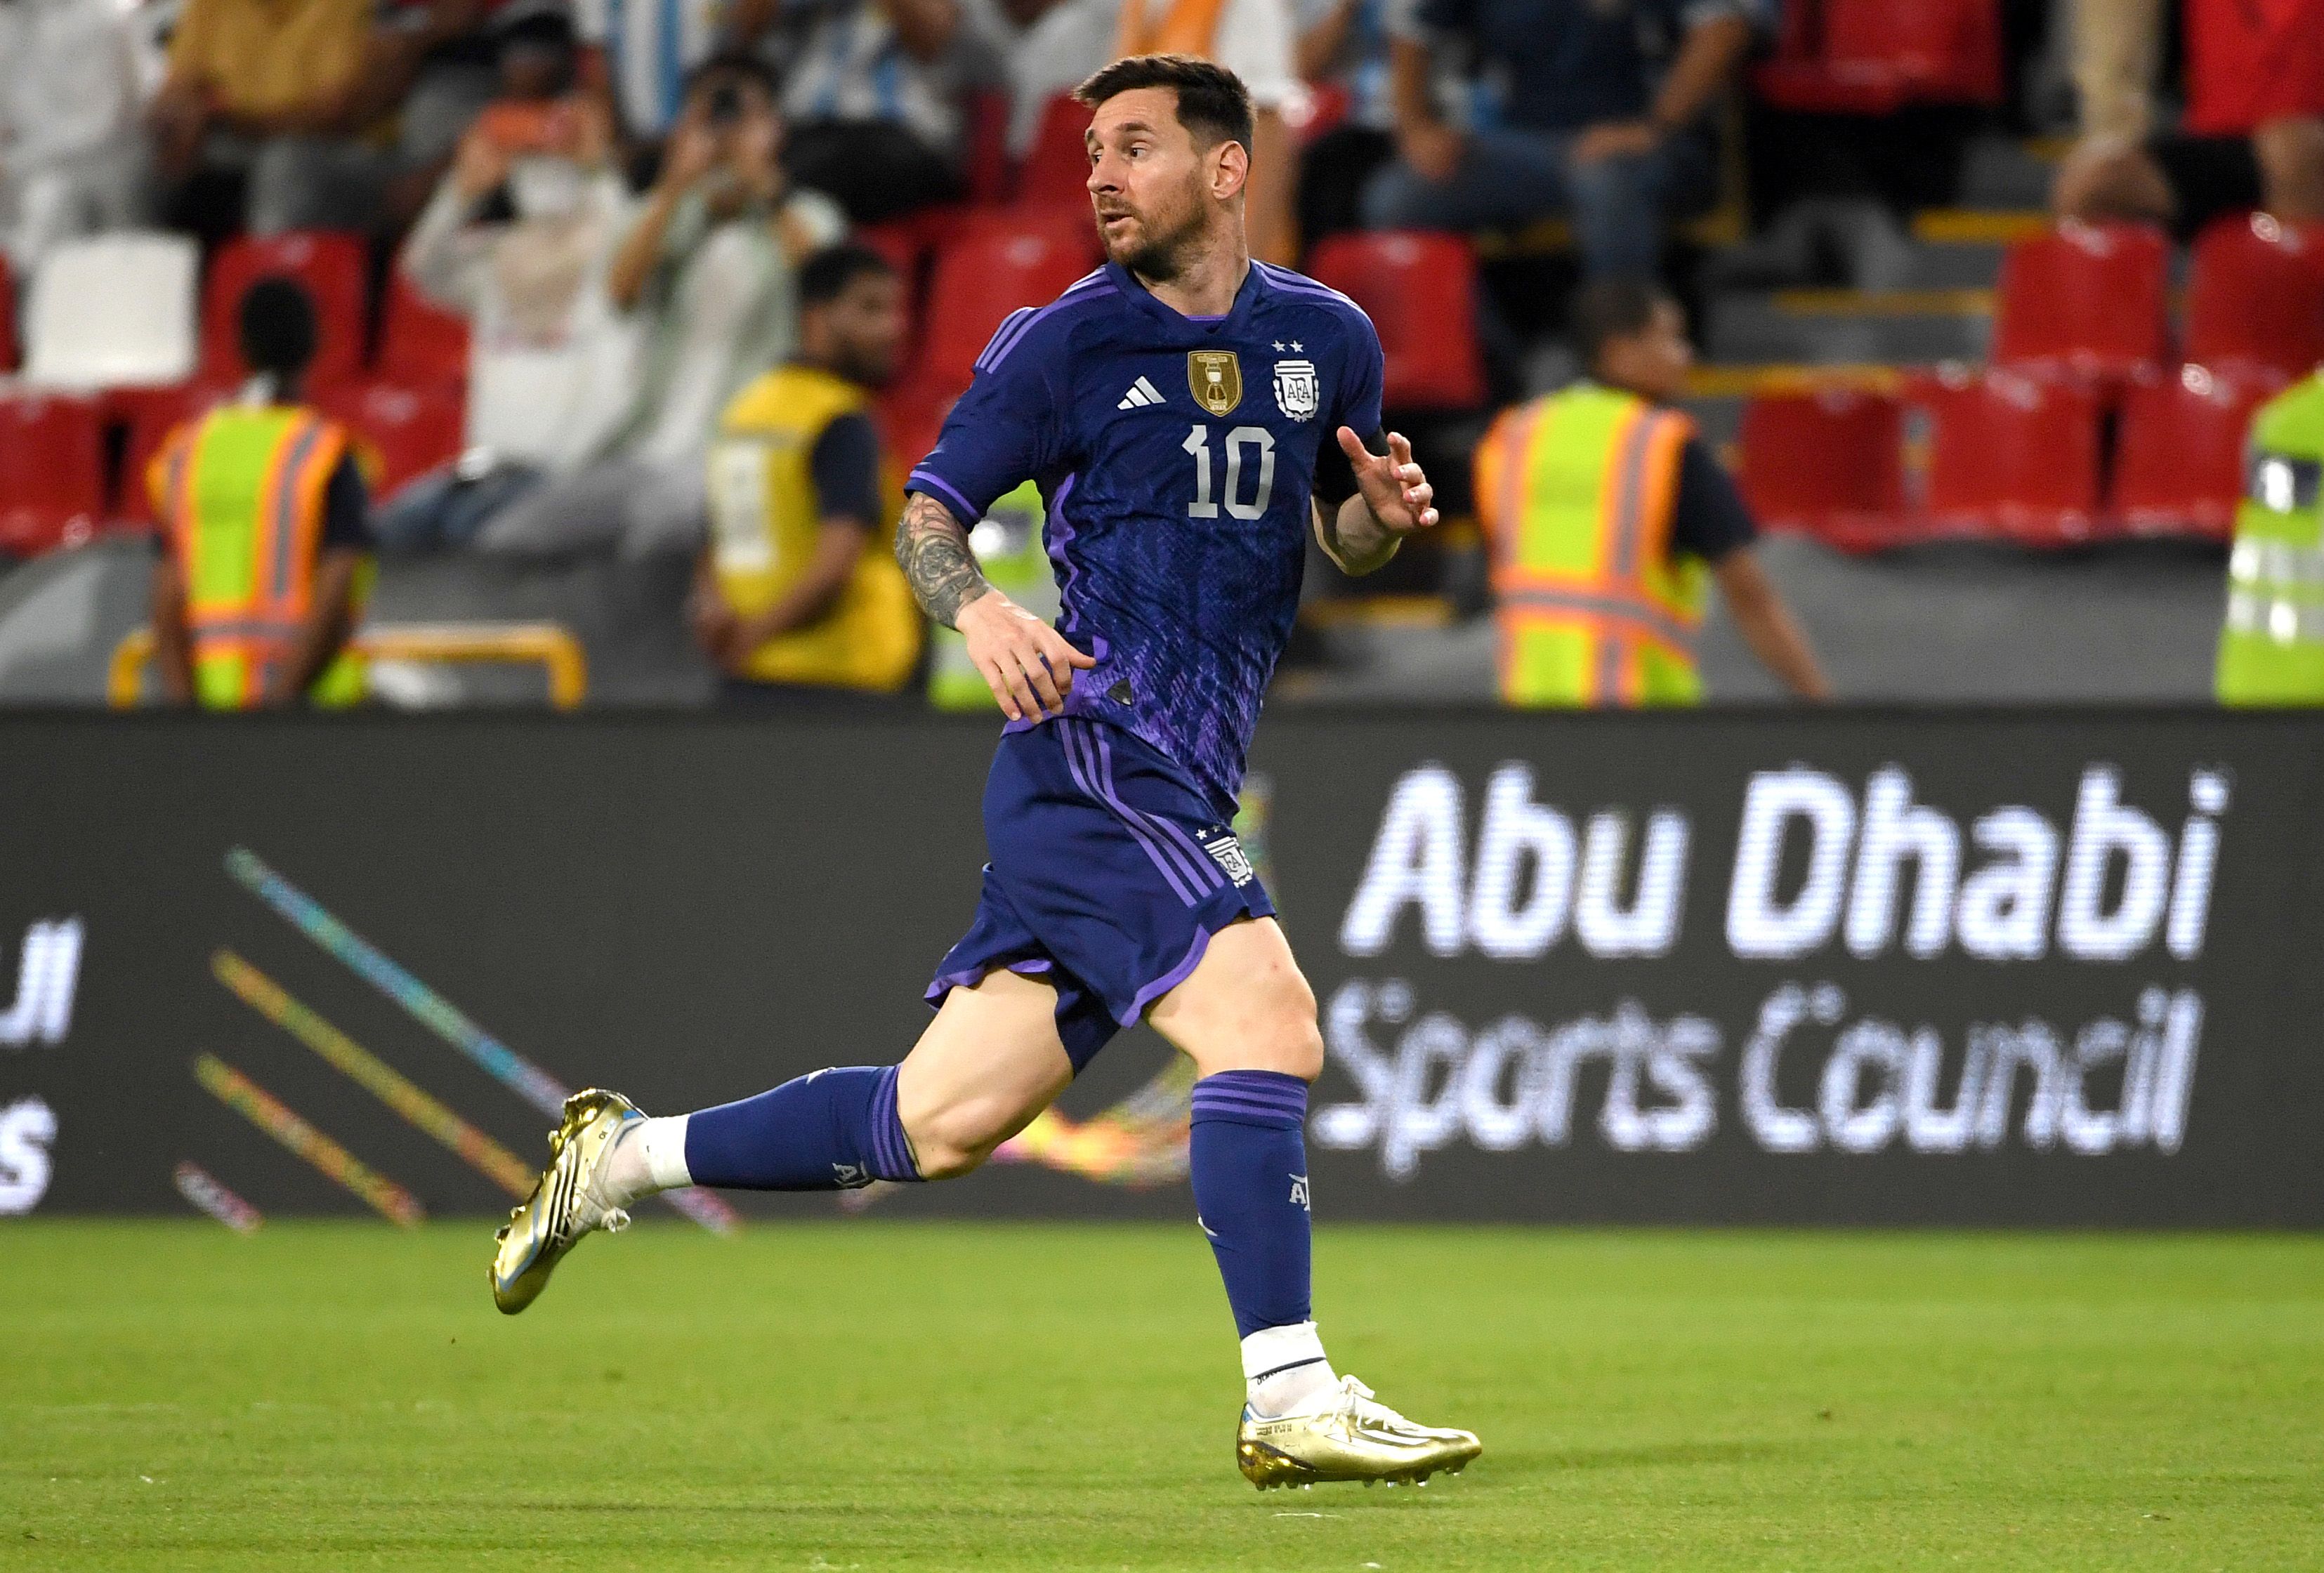 Leo Messi of Argentina in action during the international friendly